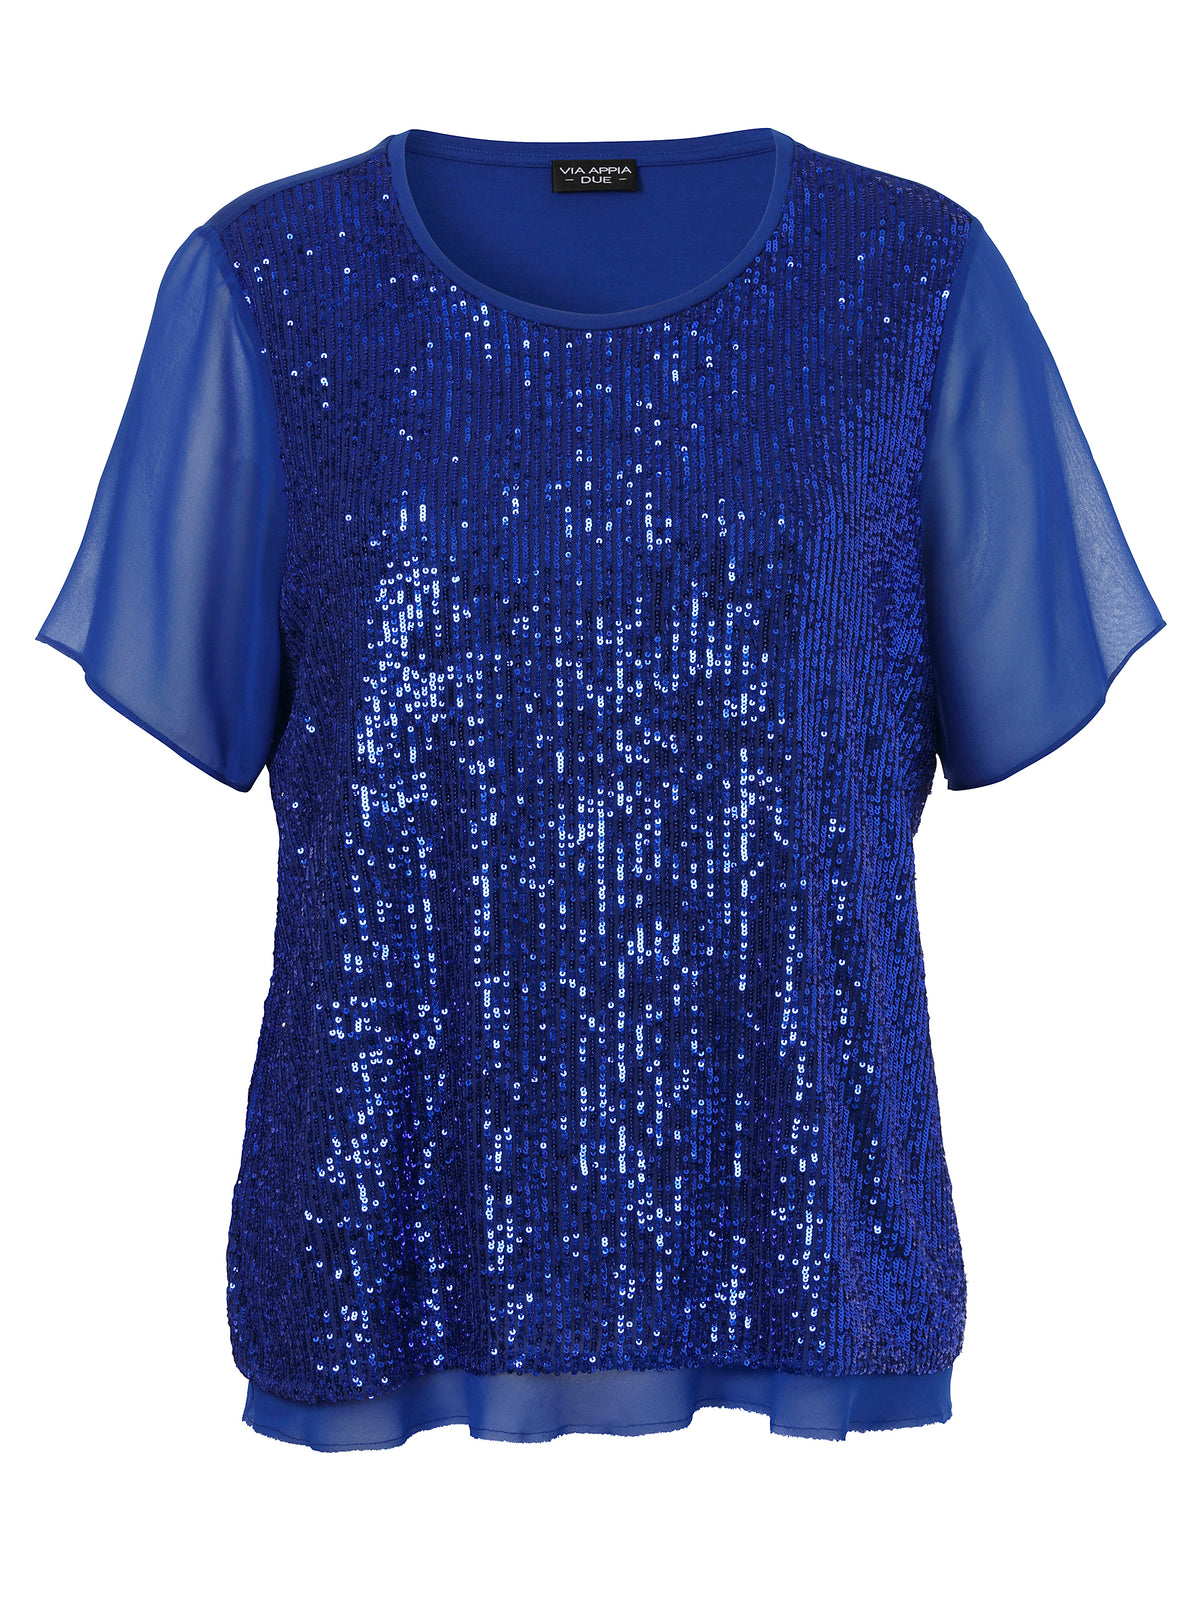 Via Appia Electric Sequined Blouse